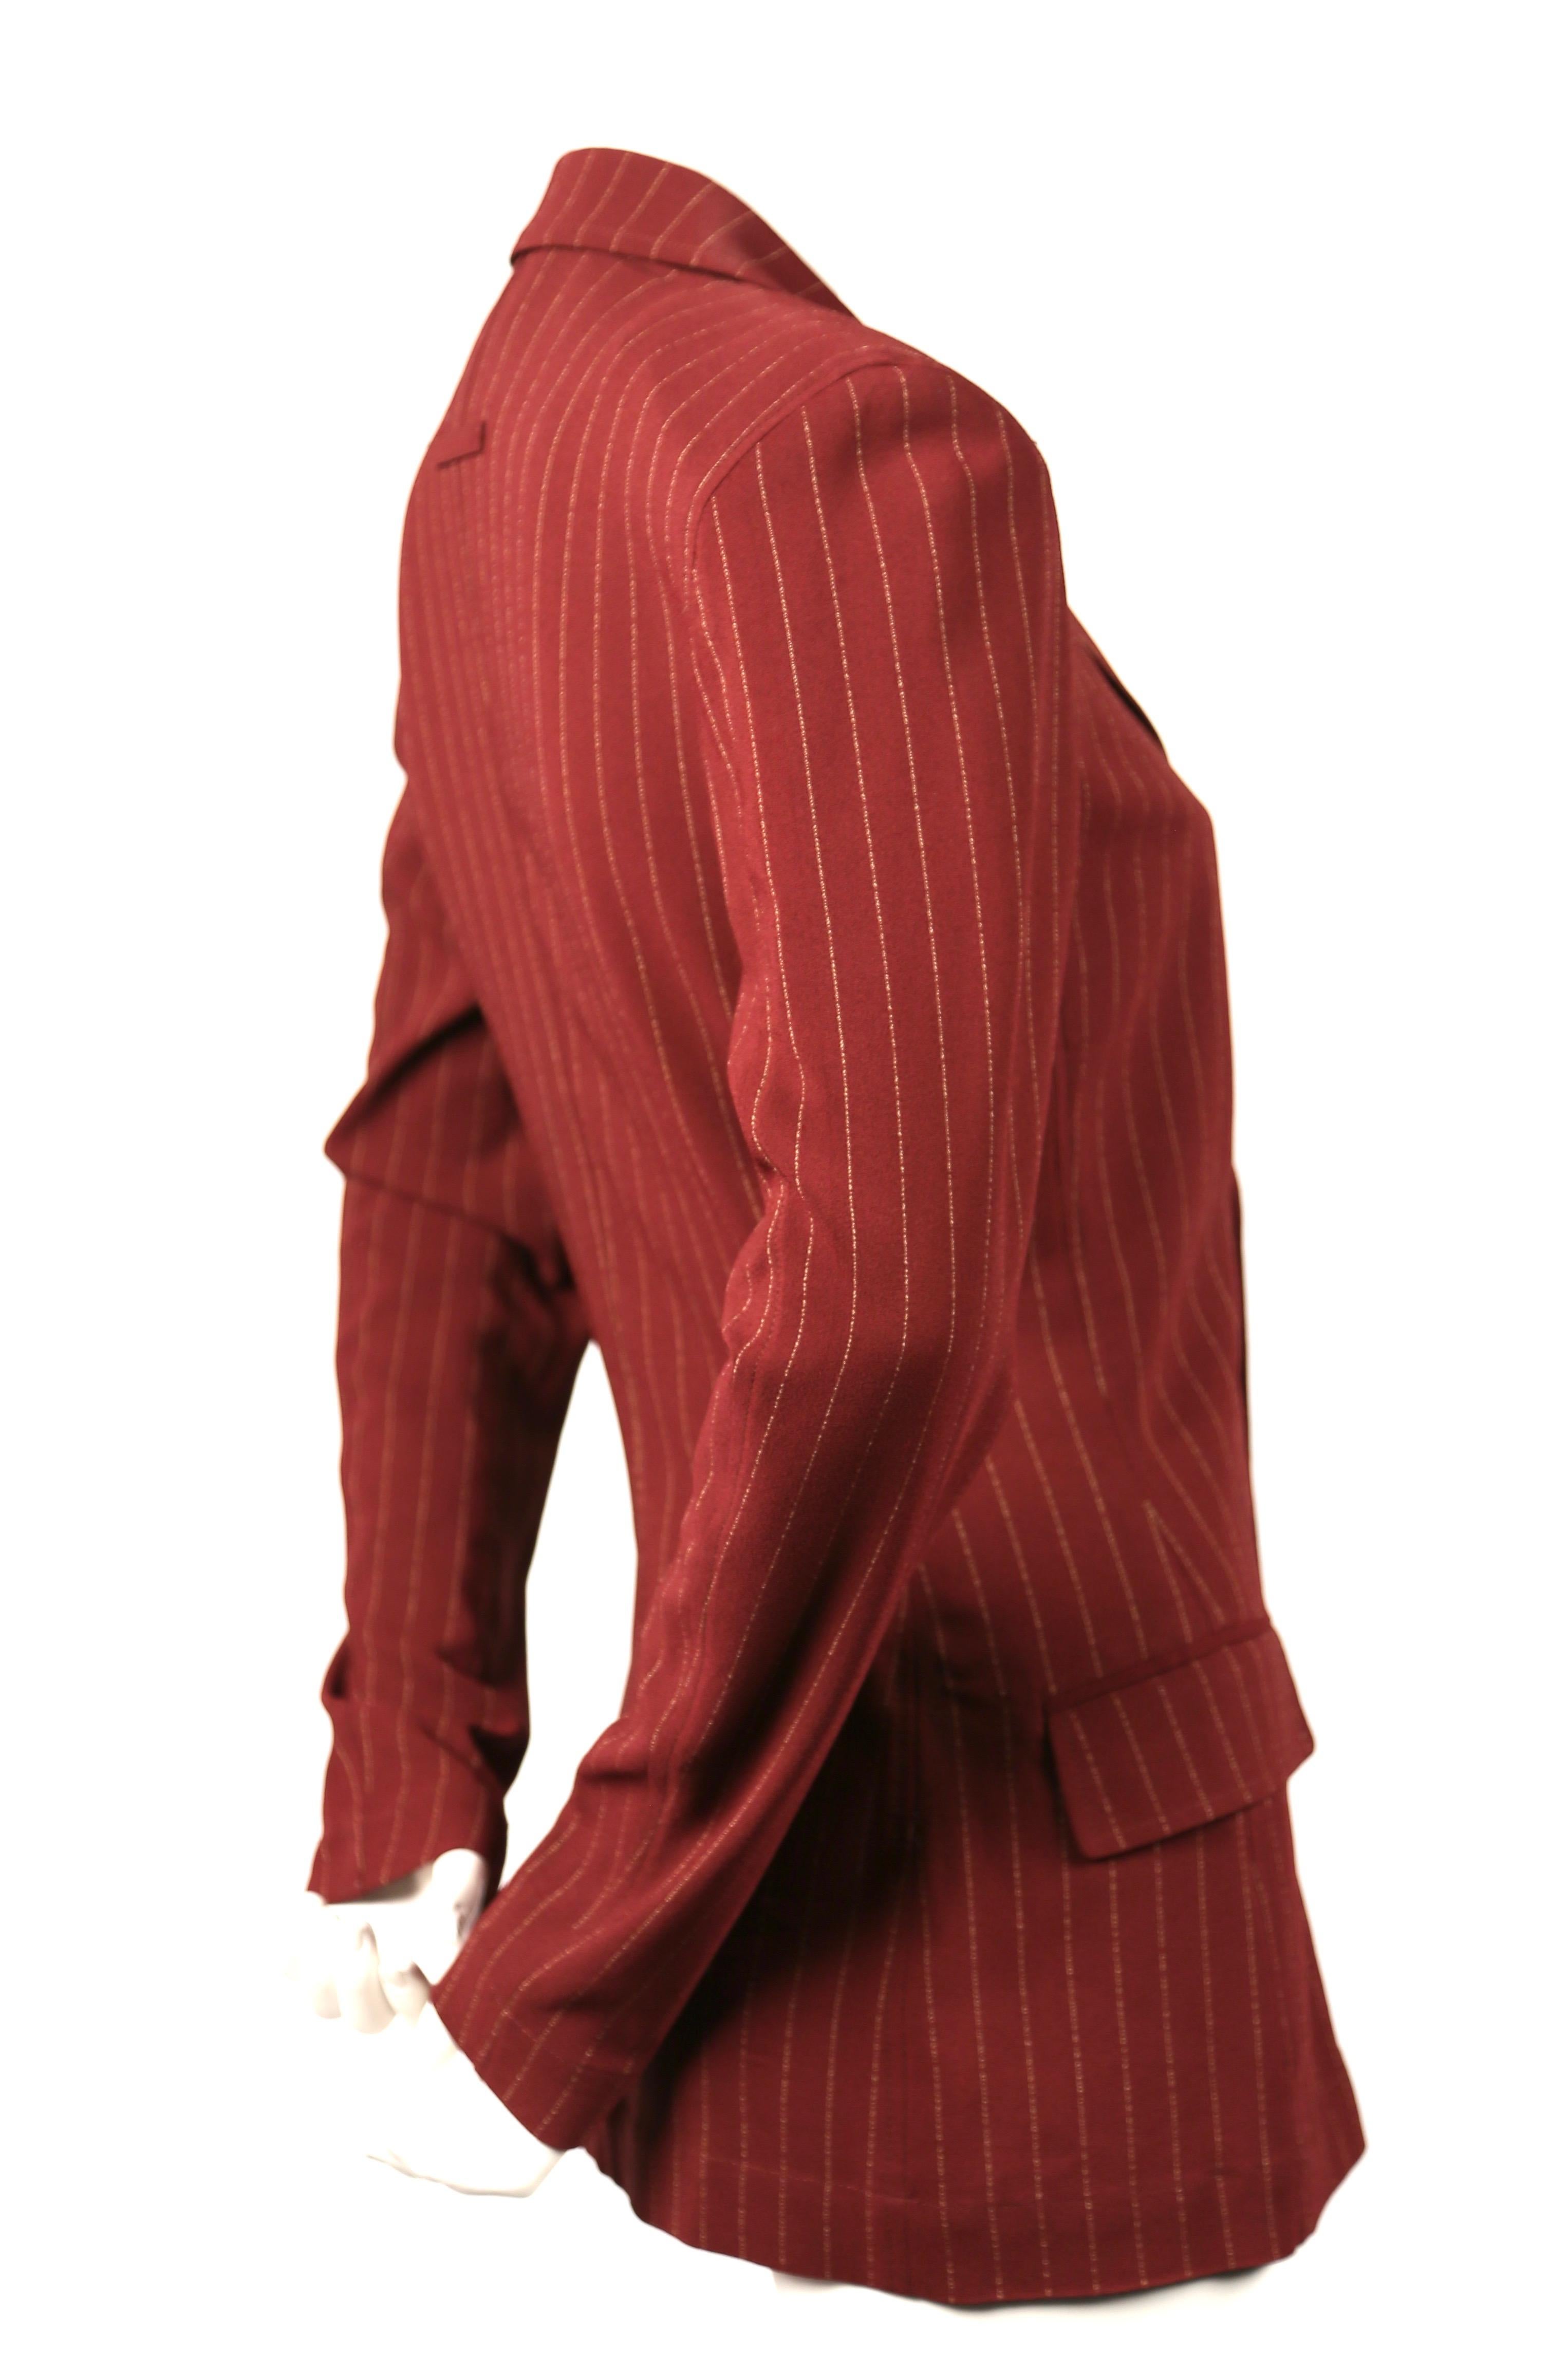 Rust pin-striped jacket designed by Jean Paul Gaultier dating to the 1990's. Slips on over the head. French size 38. Approximate measurement (unstretched): shoulder 16